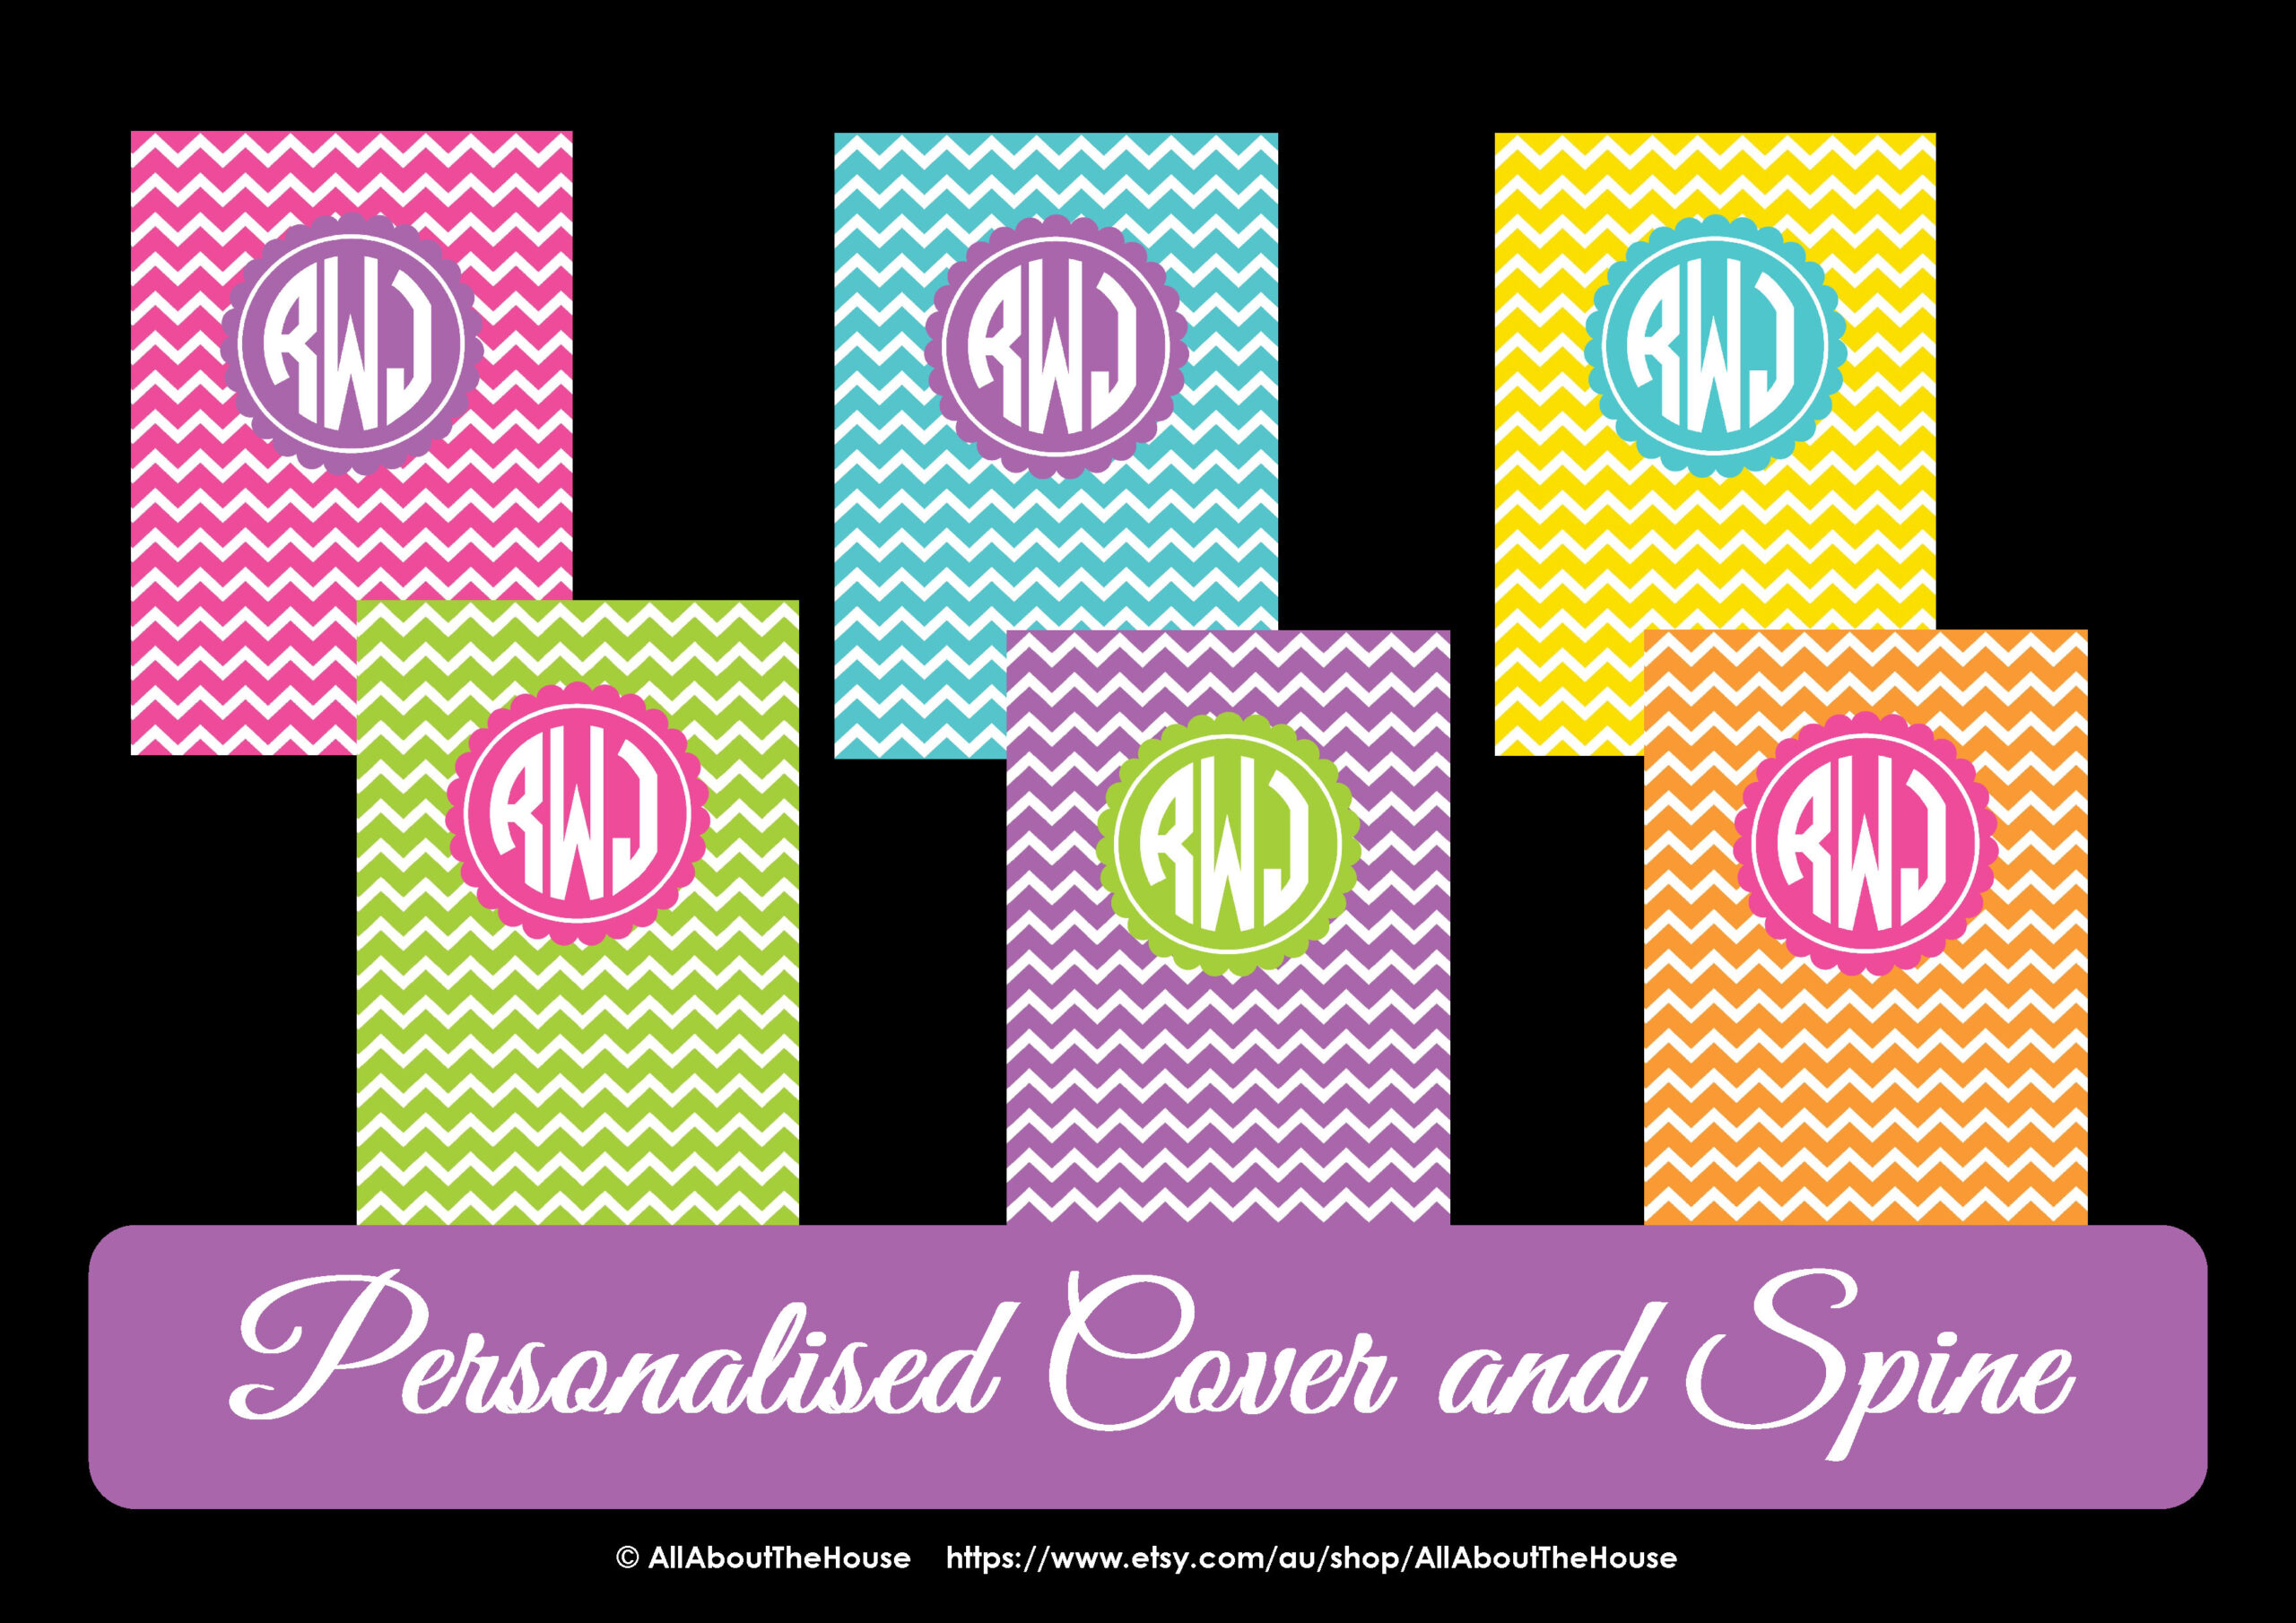 Sale! And New Monogram Binder Covers! | Allaboutthehouse Printables intended for Free Printable Monogram Binder Covers